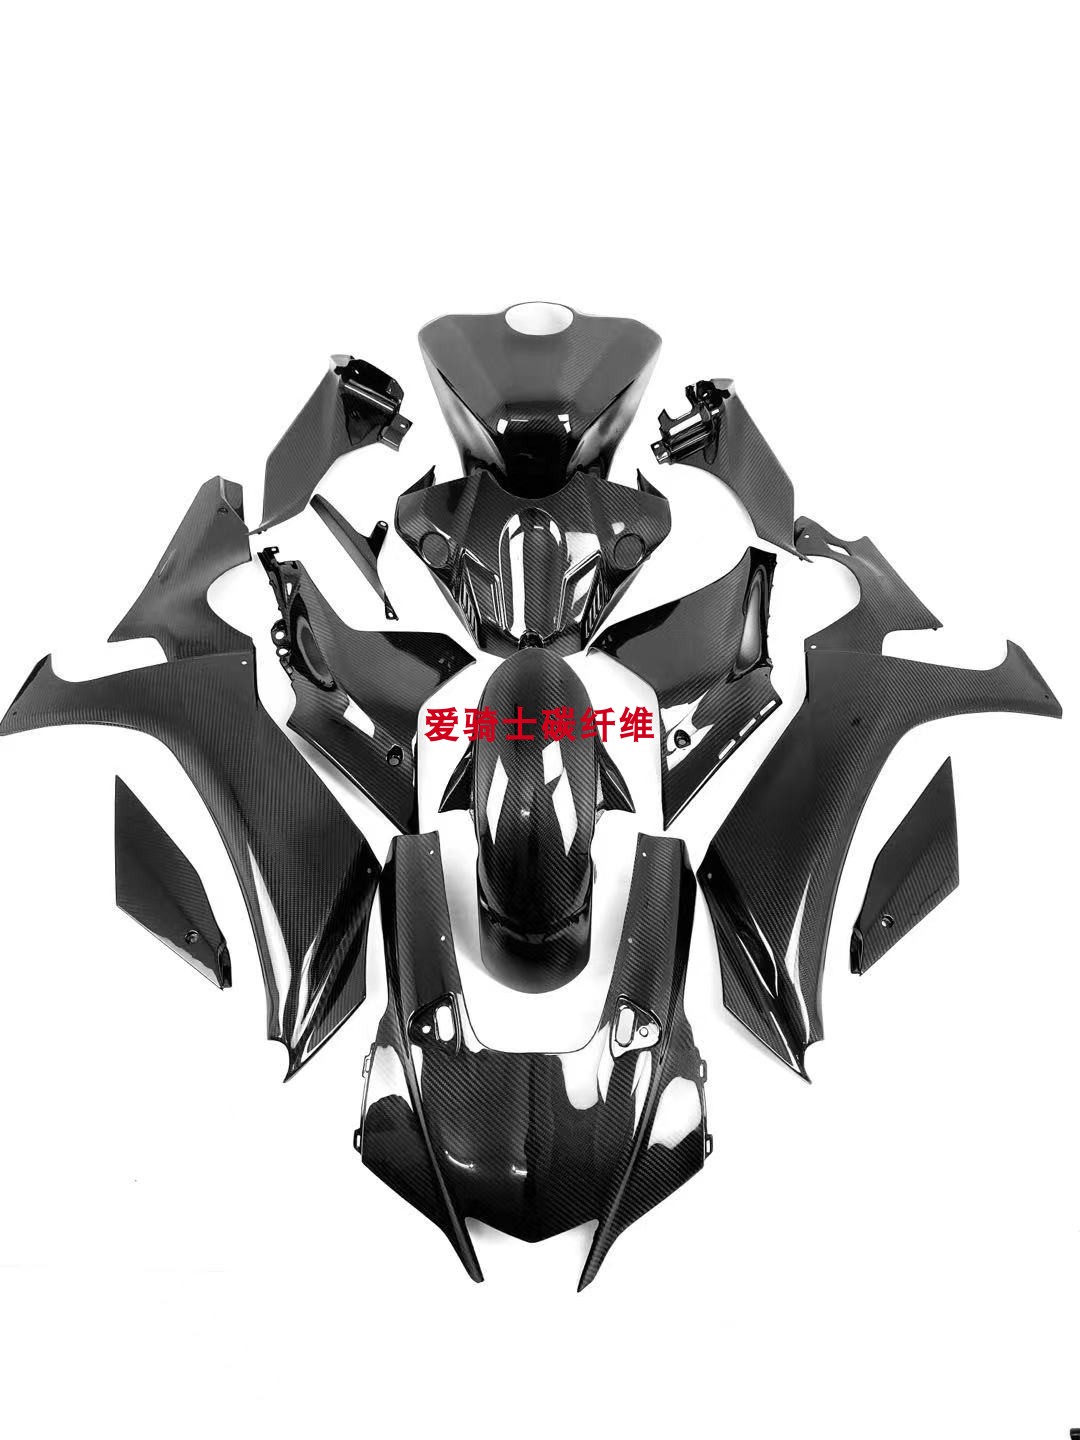 Suitable for YAMAHA Yamaha YZF-R1 R1M Carbon fiber modified accessories housing diversion cover 2019-23-Taobao